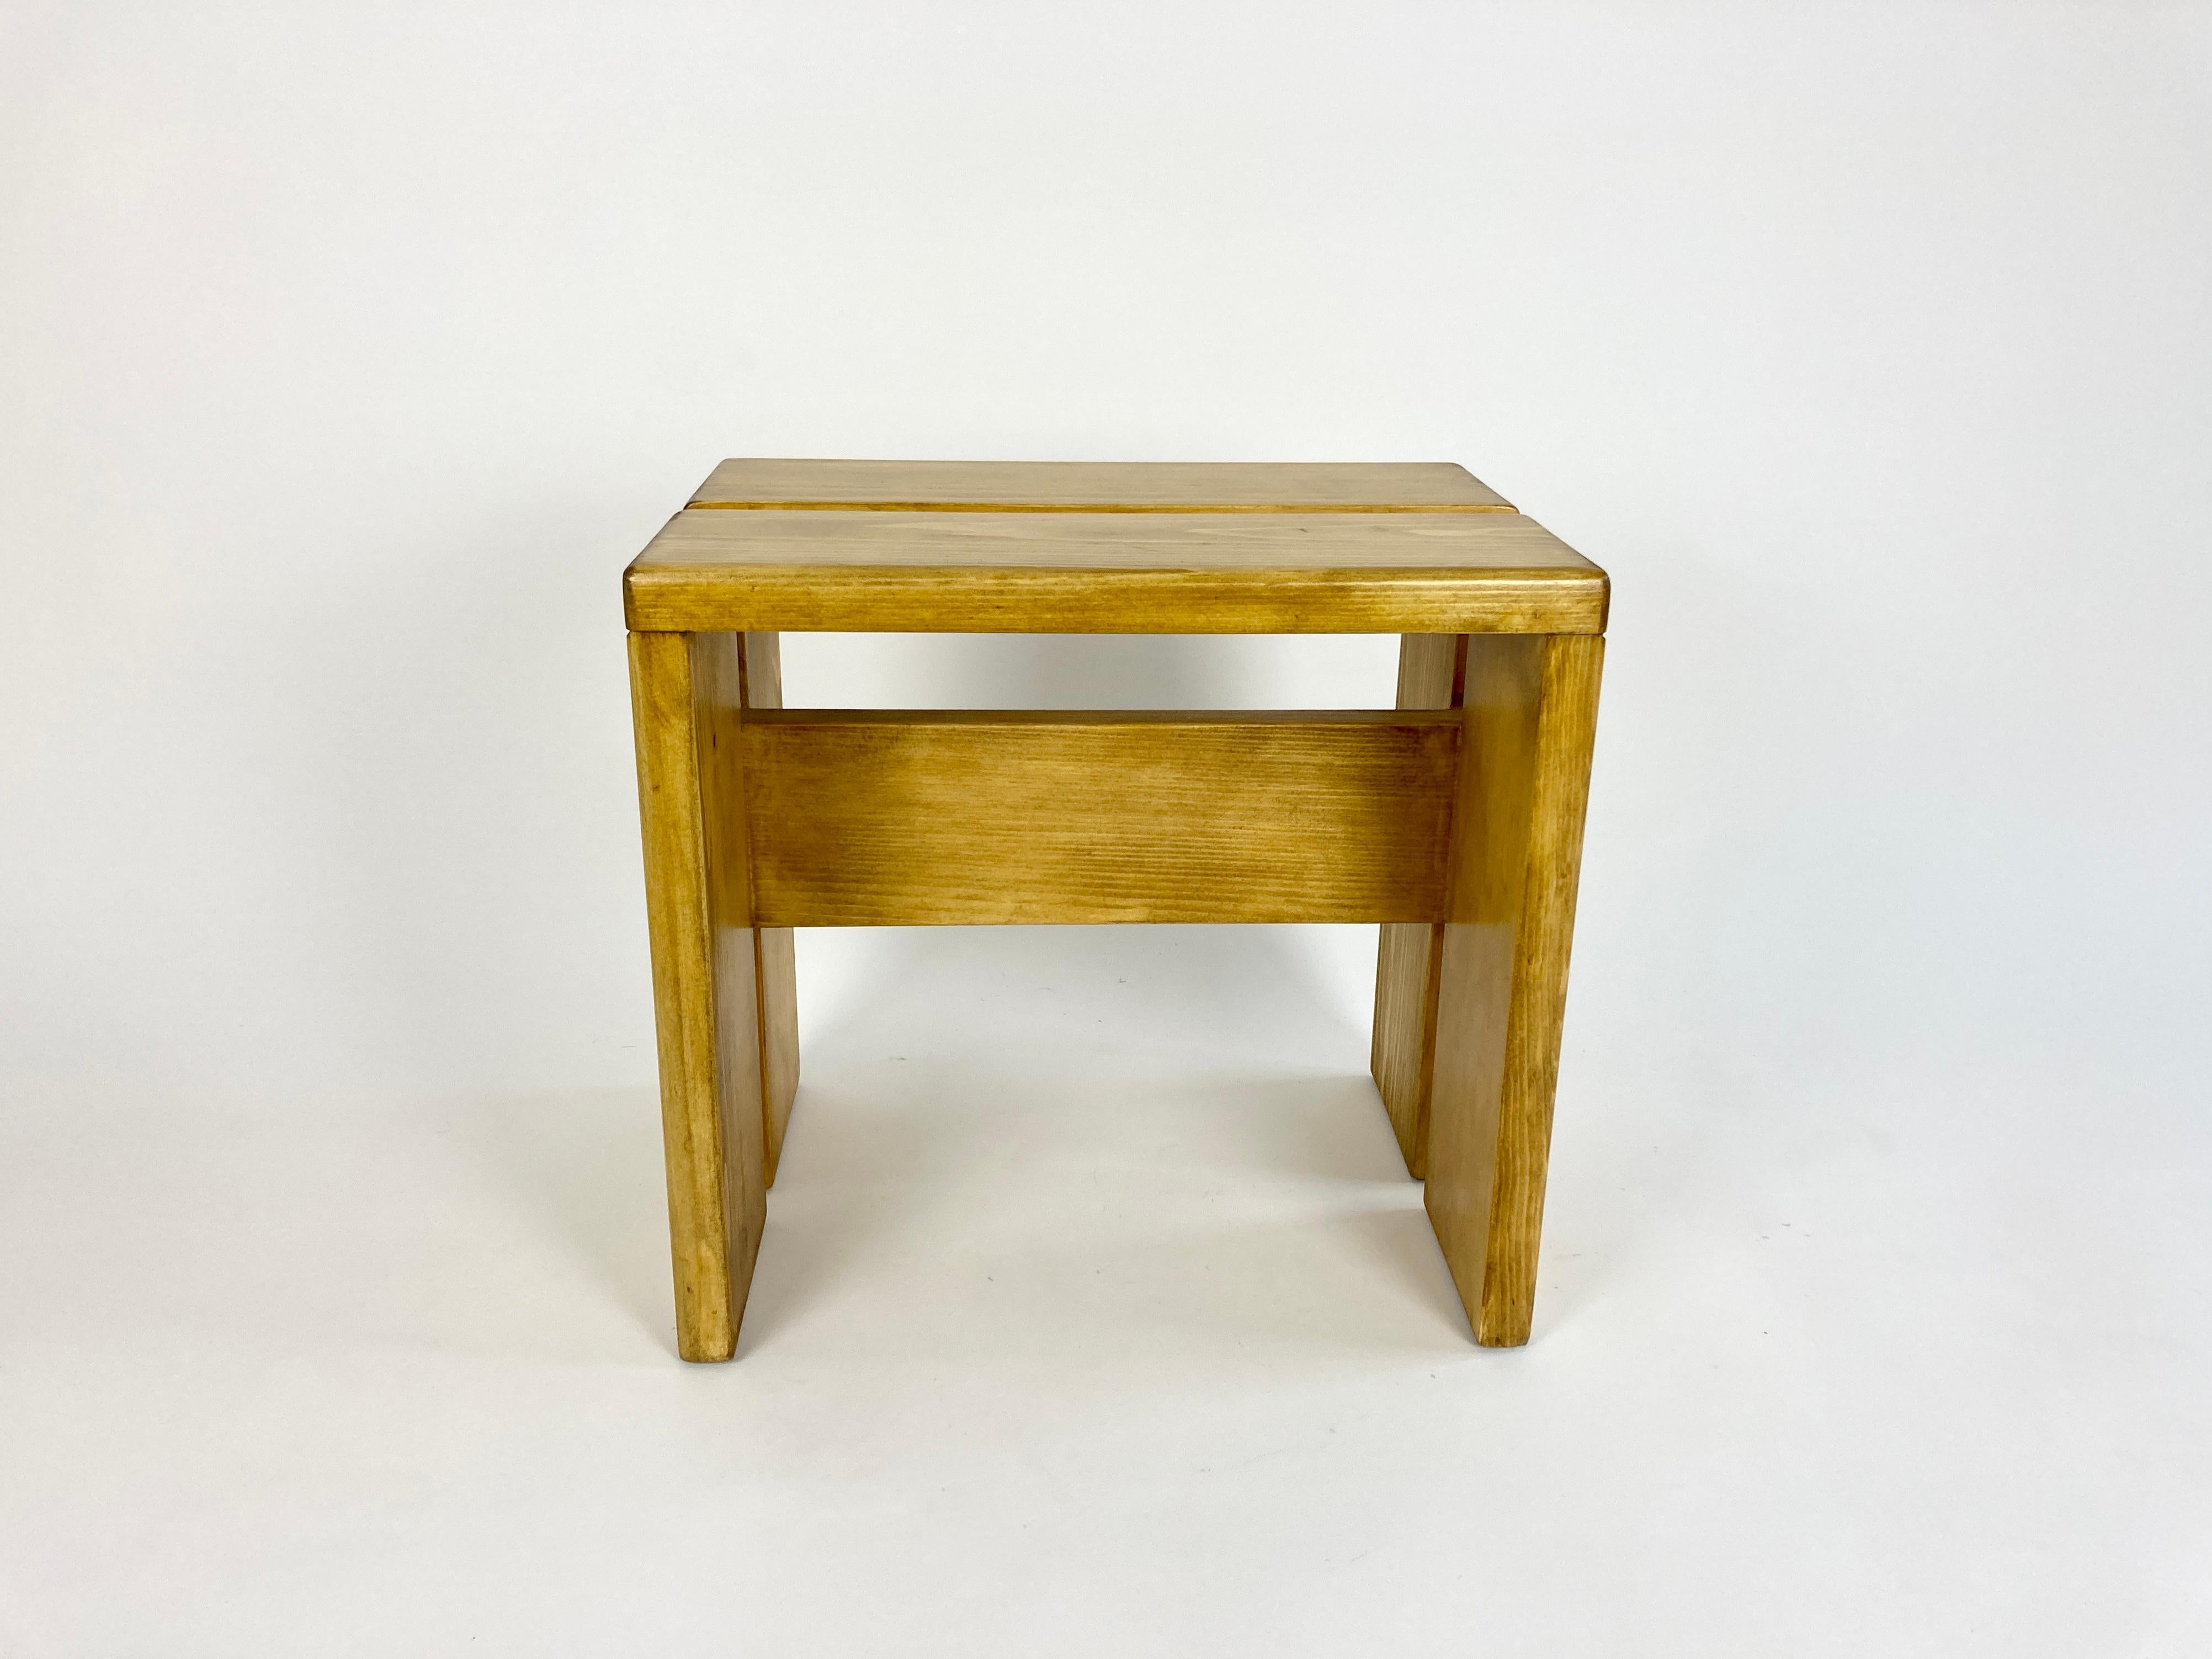 Pine Stool / Side Table / Small Bench from Les Arcs, France. Charlotte Perriand